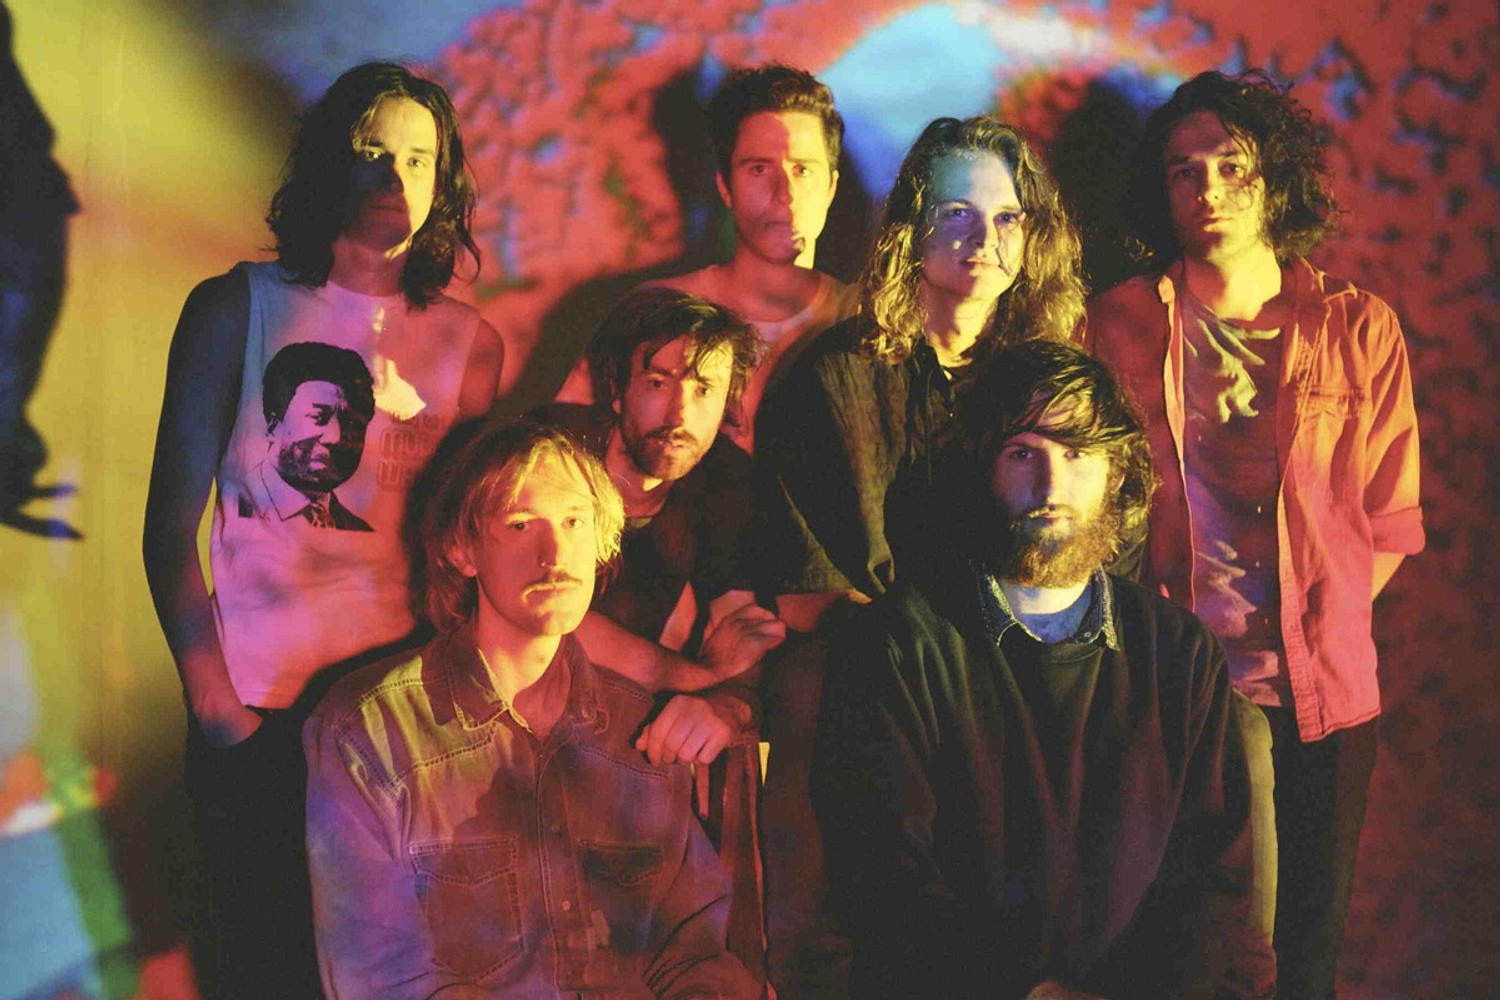 King Gizzard & The Lizard Wizard talk shedding skin: "People can think whatever they want"